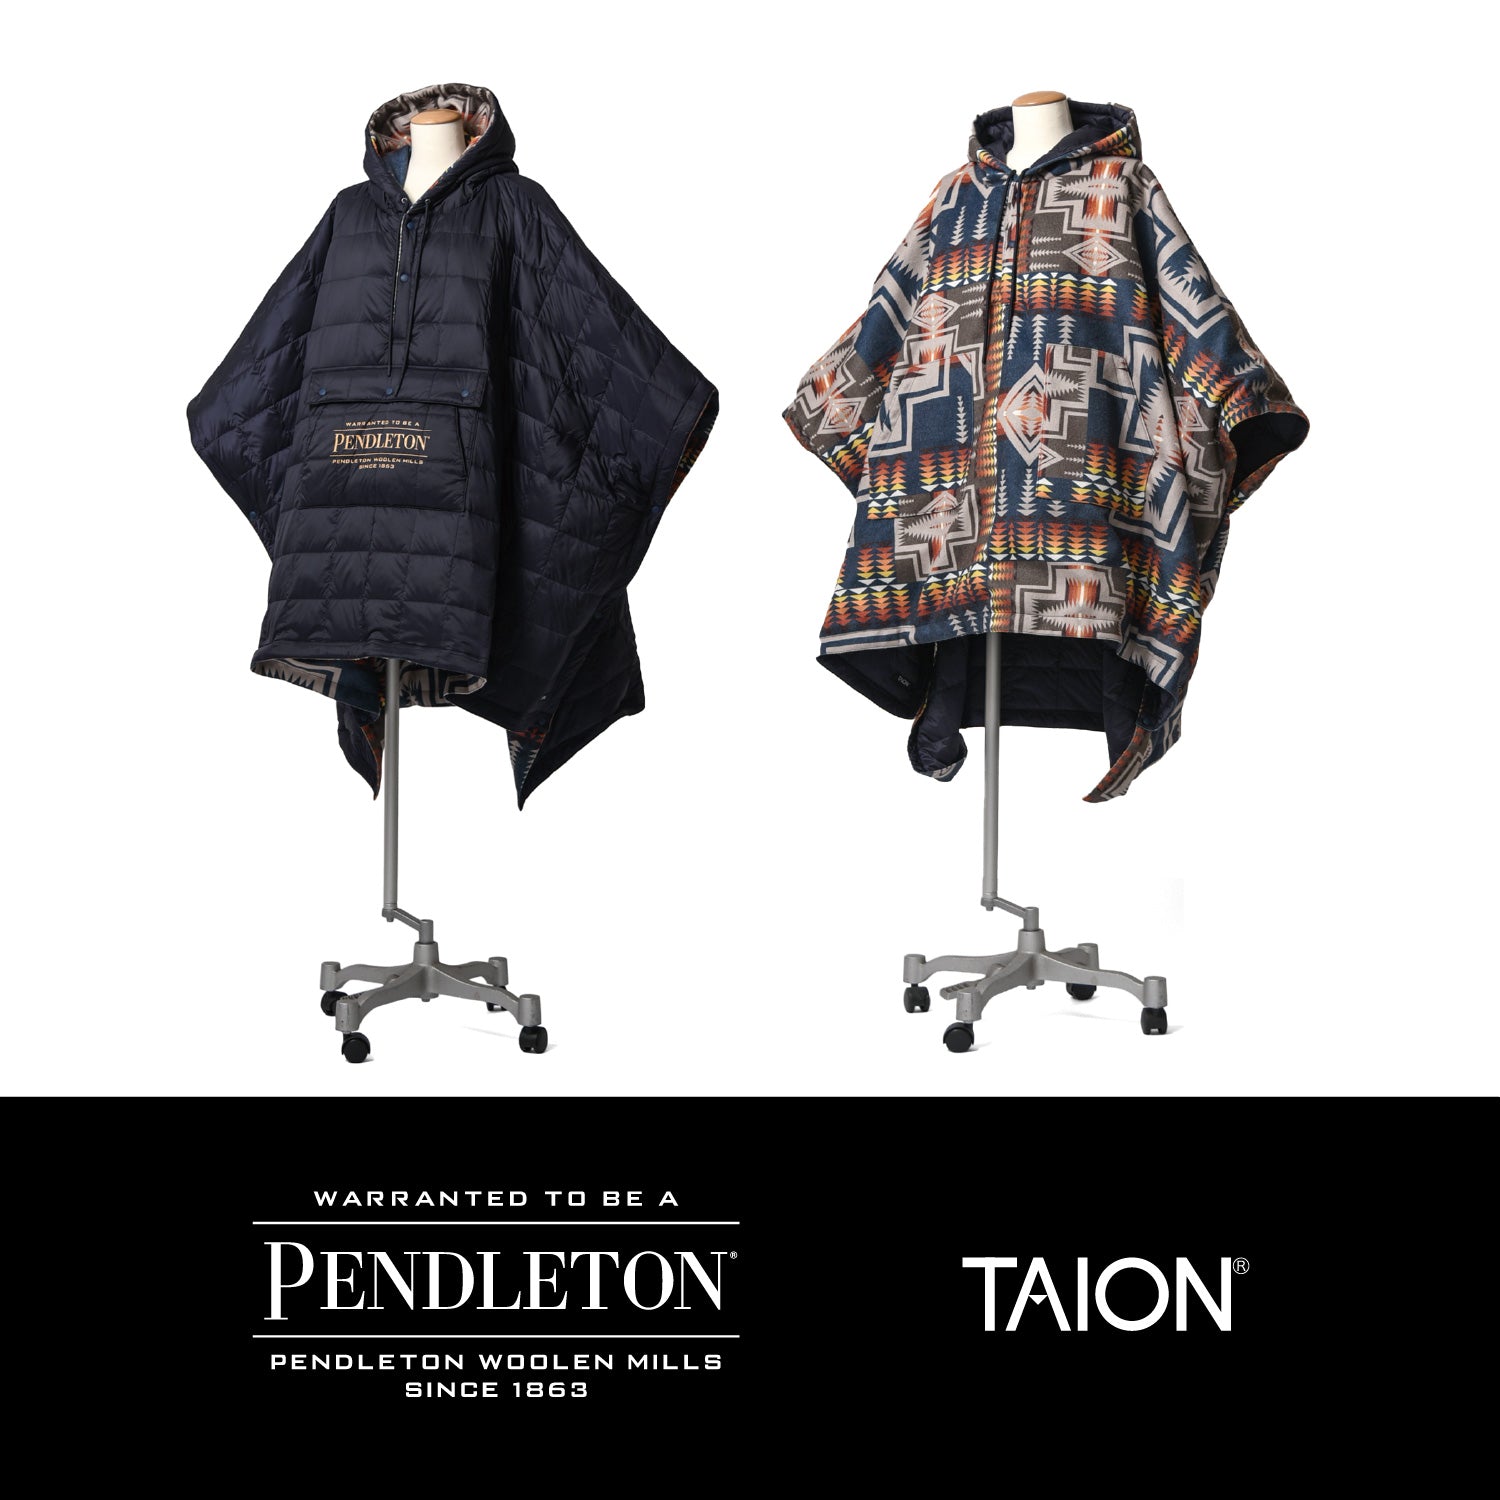 PENDELTON×TAION 2022 vol.2 – TAION INNER DOWN WEAR-公式通販サイト